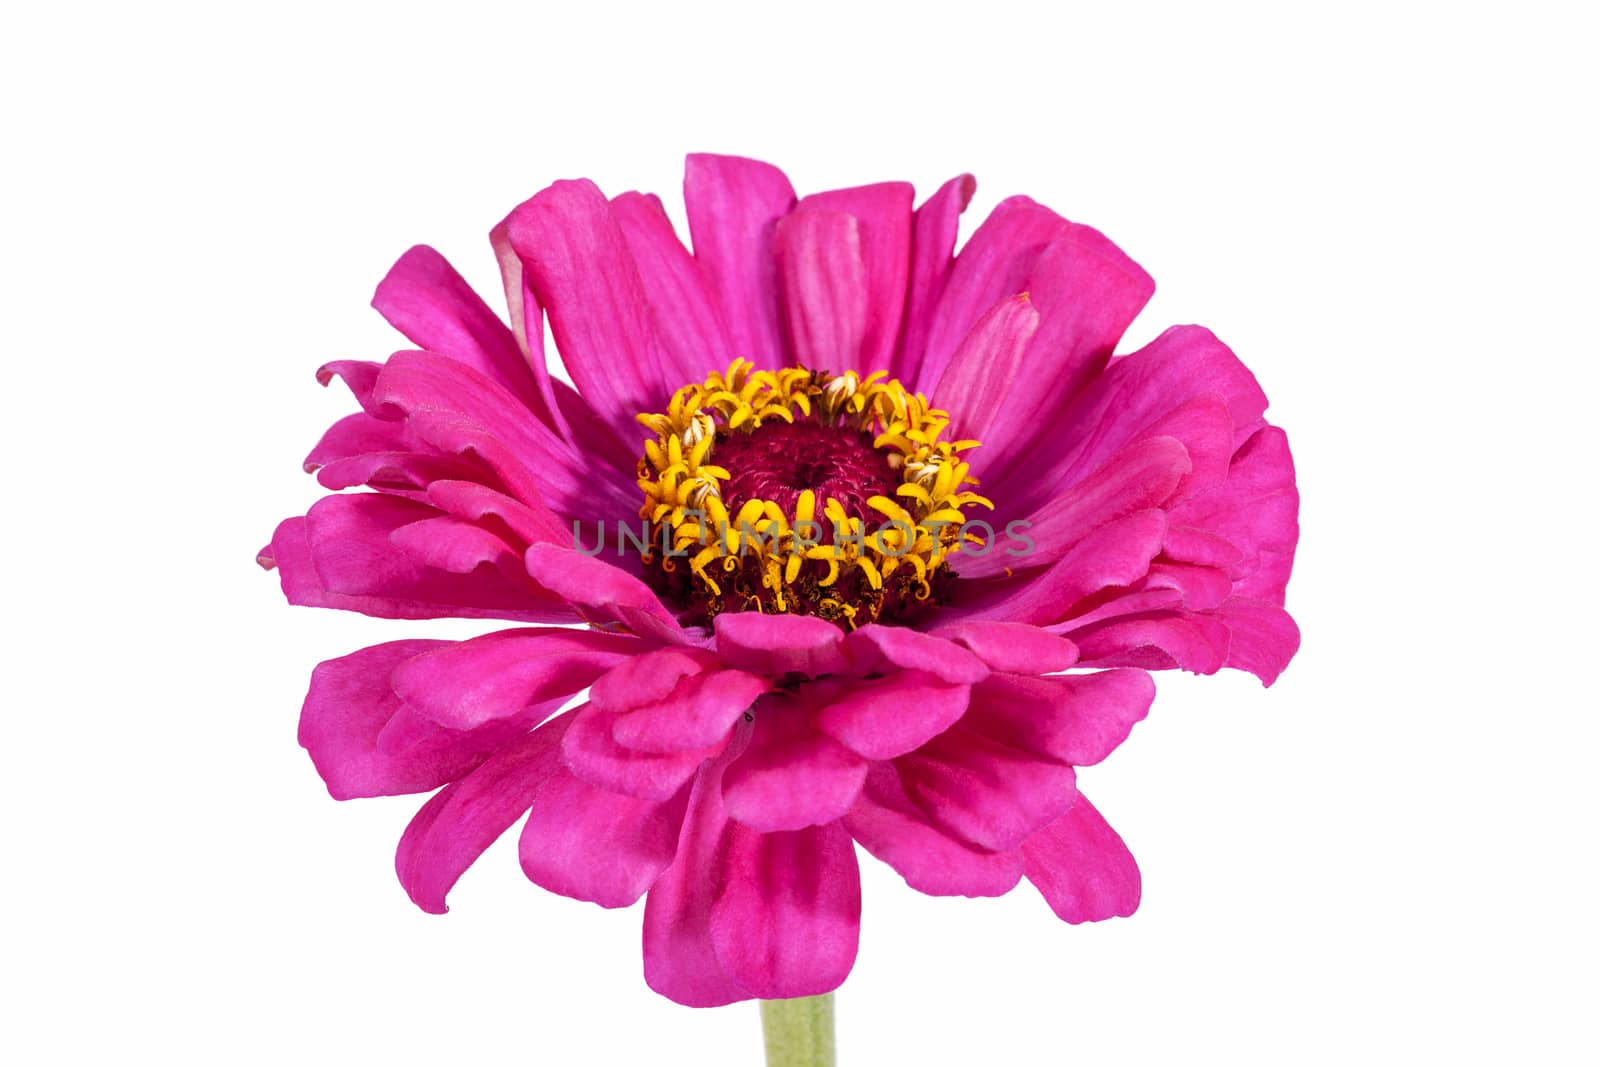 Single flower of pink zinnia isolated on white background, close up